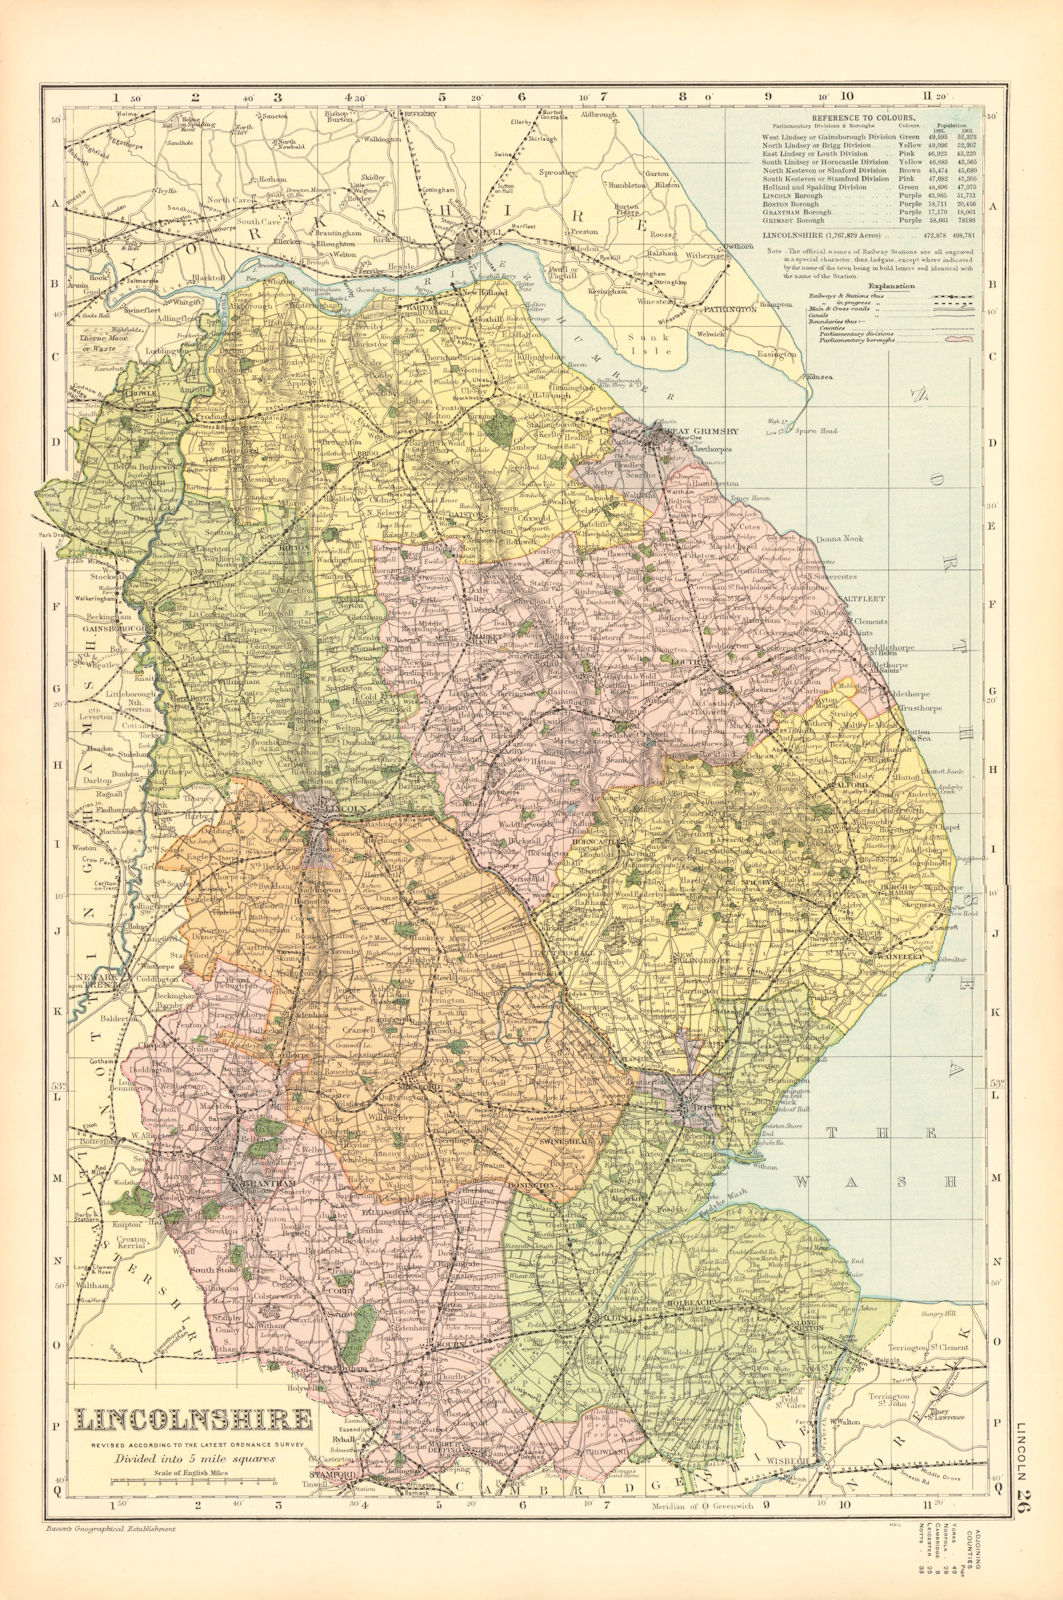 LINCOLNSHIRE. Showing Parliamentary divisions, boroughs & parks. BACON 1904 map